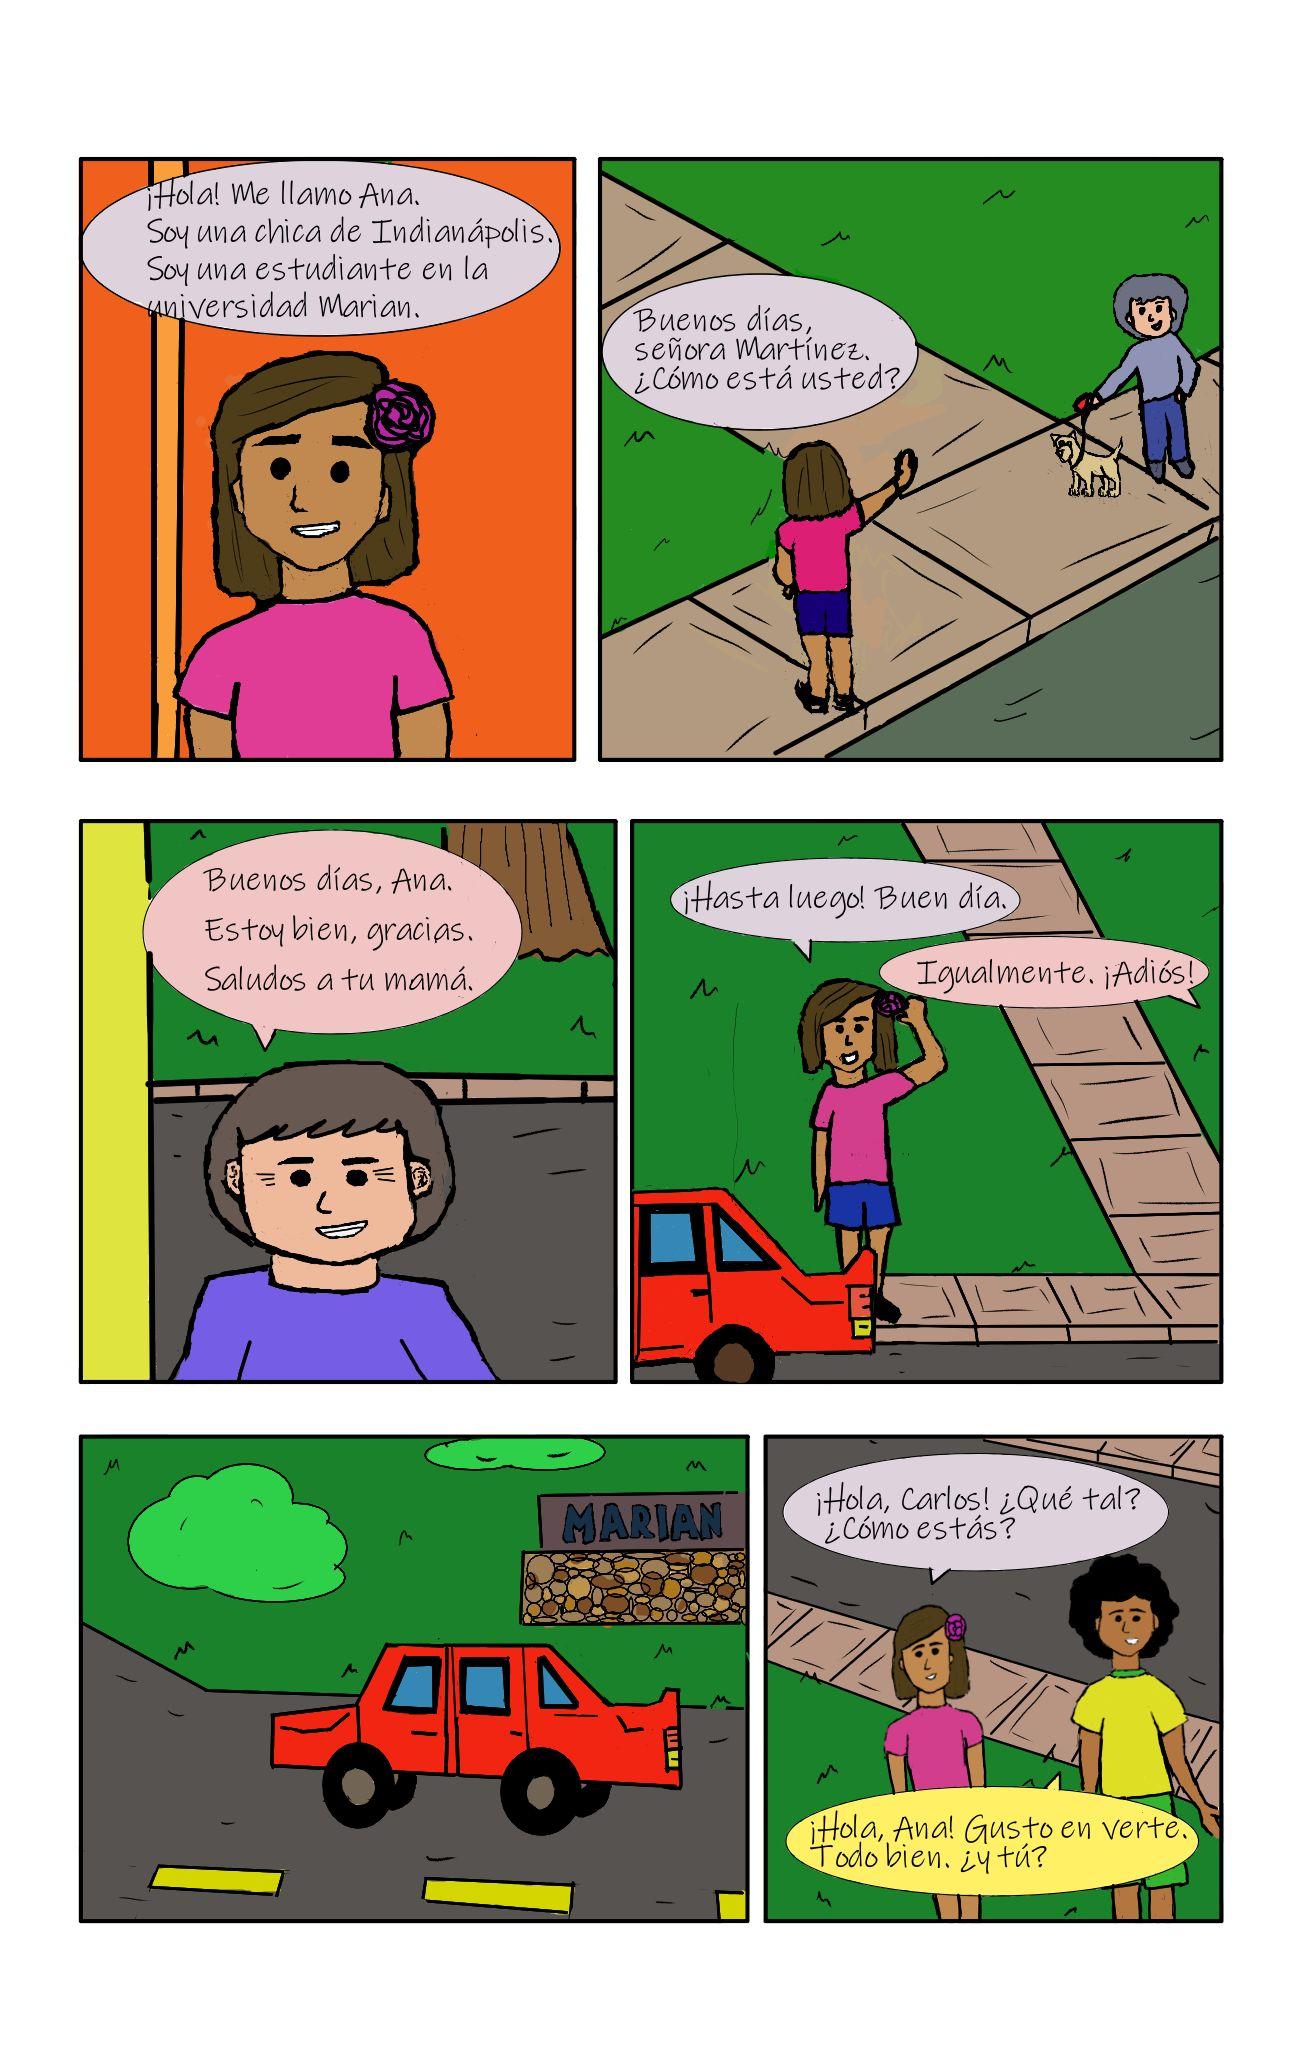 Panel 1: A girl with a pink shirt and a pink flower in her short brown hair says, "¡Hola! Me llamo Ana. Soy una chica de Indianapolis. Soy una estudiante en la universidad Marian." Panel 2: Ana waves to a gray-haired woman on the sidewalk with her dog and says, "Buenos días, Señora Martinez. ¿Cómo está usted?" Panel 3: Señora Martinez says, "Buenos días, Ana. Estoy bien, gracias. Saludos a tu mamá." Panel 4: Ana waves good-bye as a red car pulls up. "¡Hasta luego! Buen día." Senora Martinez replies off-panel, "Igualmente. ¡Adios!" Panel 5: A red car drives on the road past a stone sign that reads, "Marian." Panel 6: Ana is standing on the grass talking to a taller boy with a yellow shirt and black hair. "¡Hola, Carlos! ¿Qué tál? ¿Cómo estás?" Carlos replies, "¡Hola, Ana! Gusto en verte. Todo bien. ¿Y tú?"